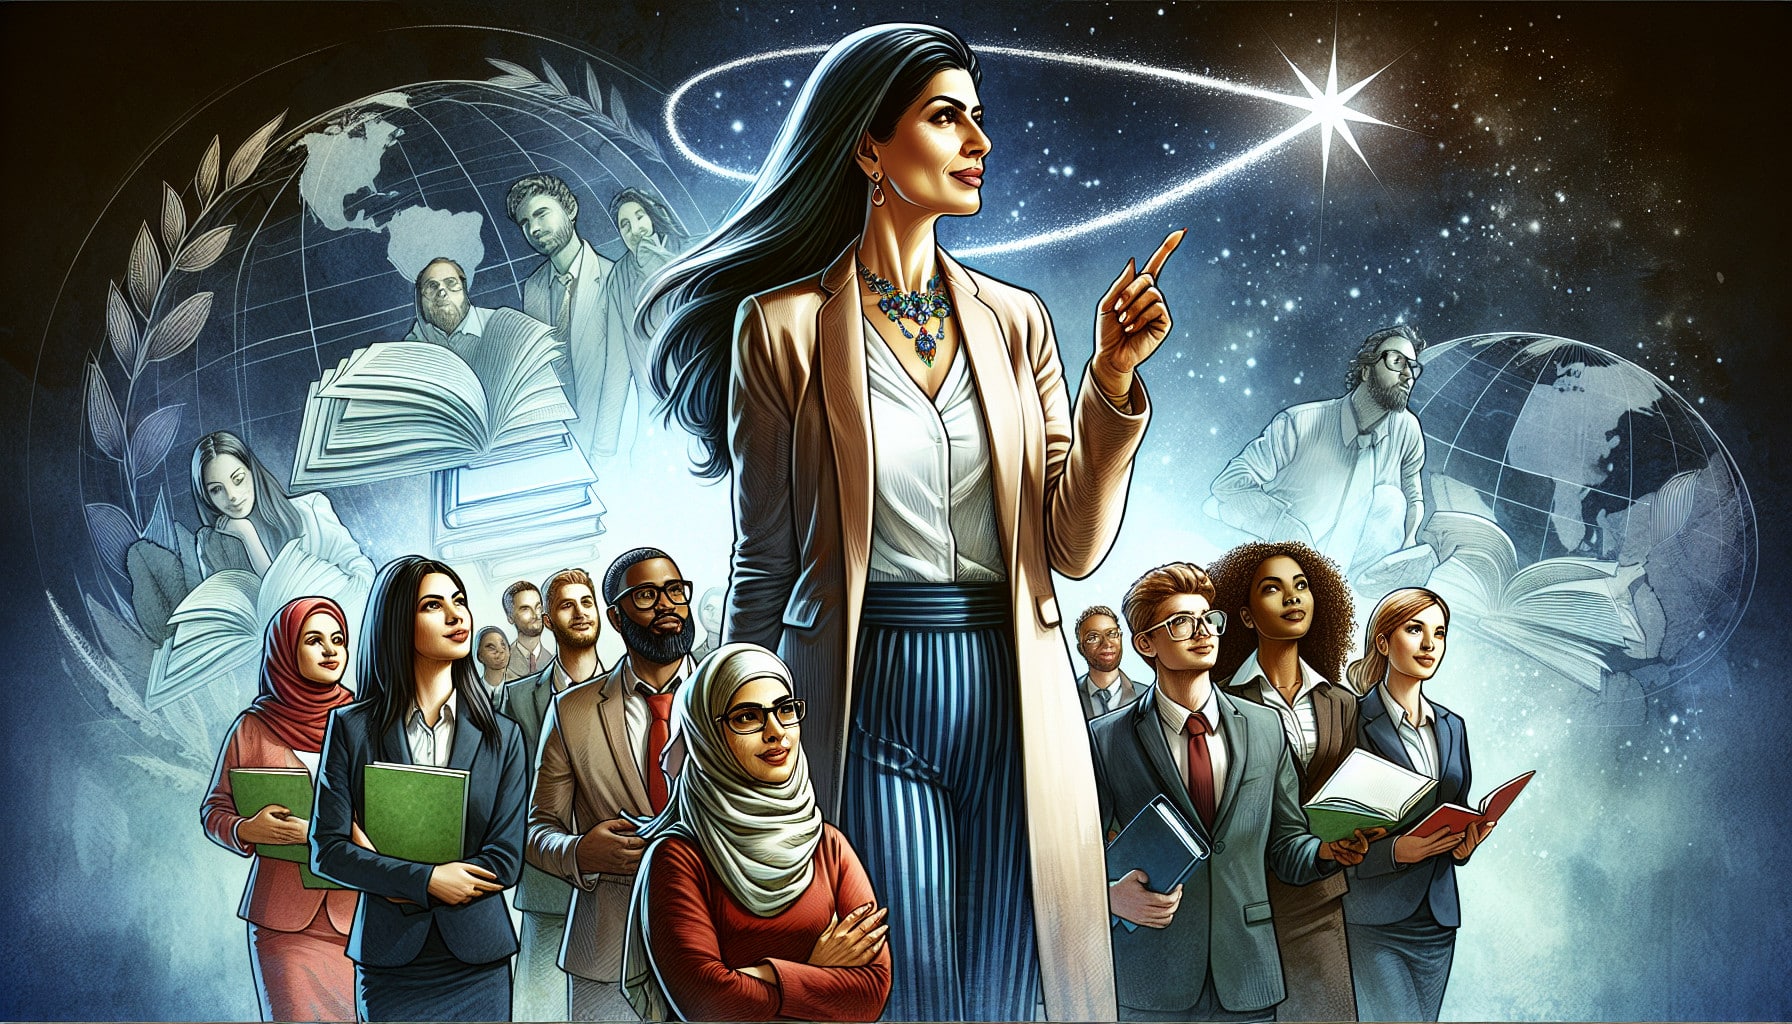 A visionary illustration of a teacher as a leader guiding a group of educators